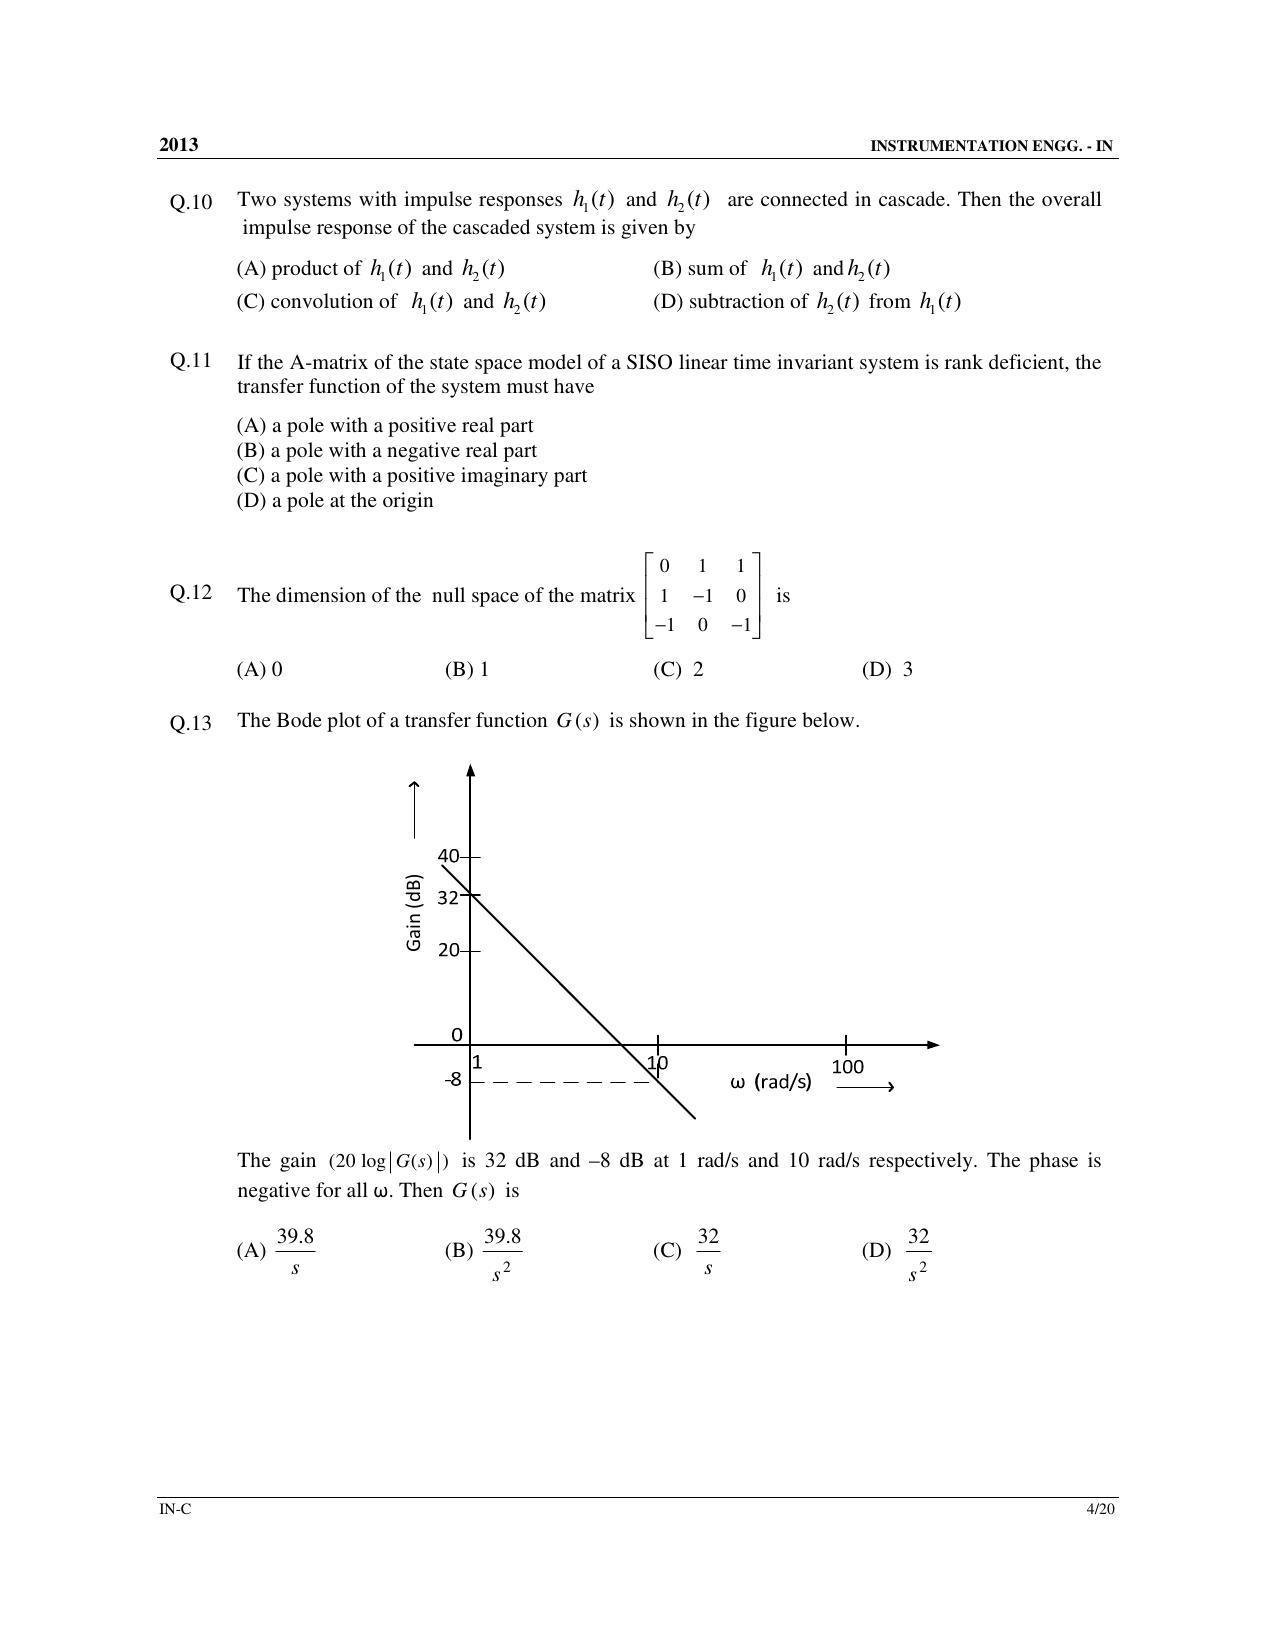 GATE 2013 Instrumentation Engineering (IN) Question Paper with Answer Key - Page 39